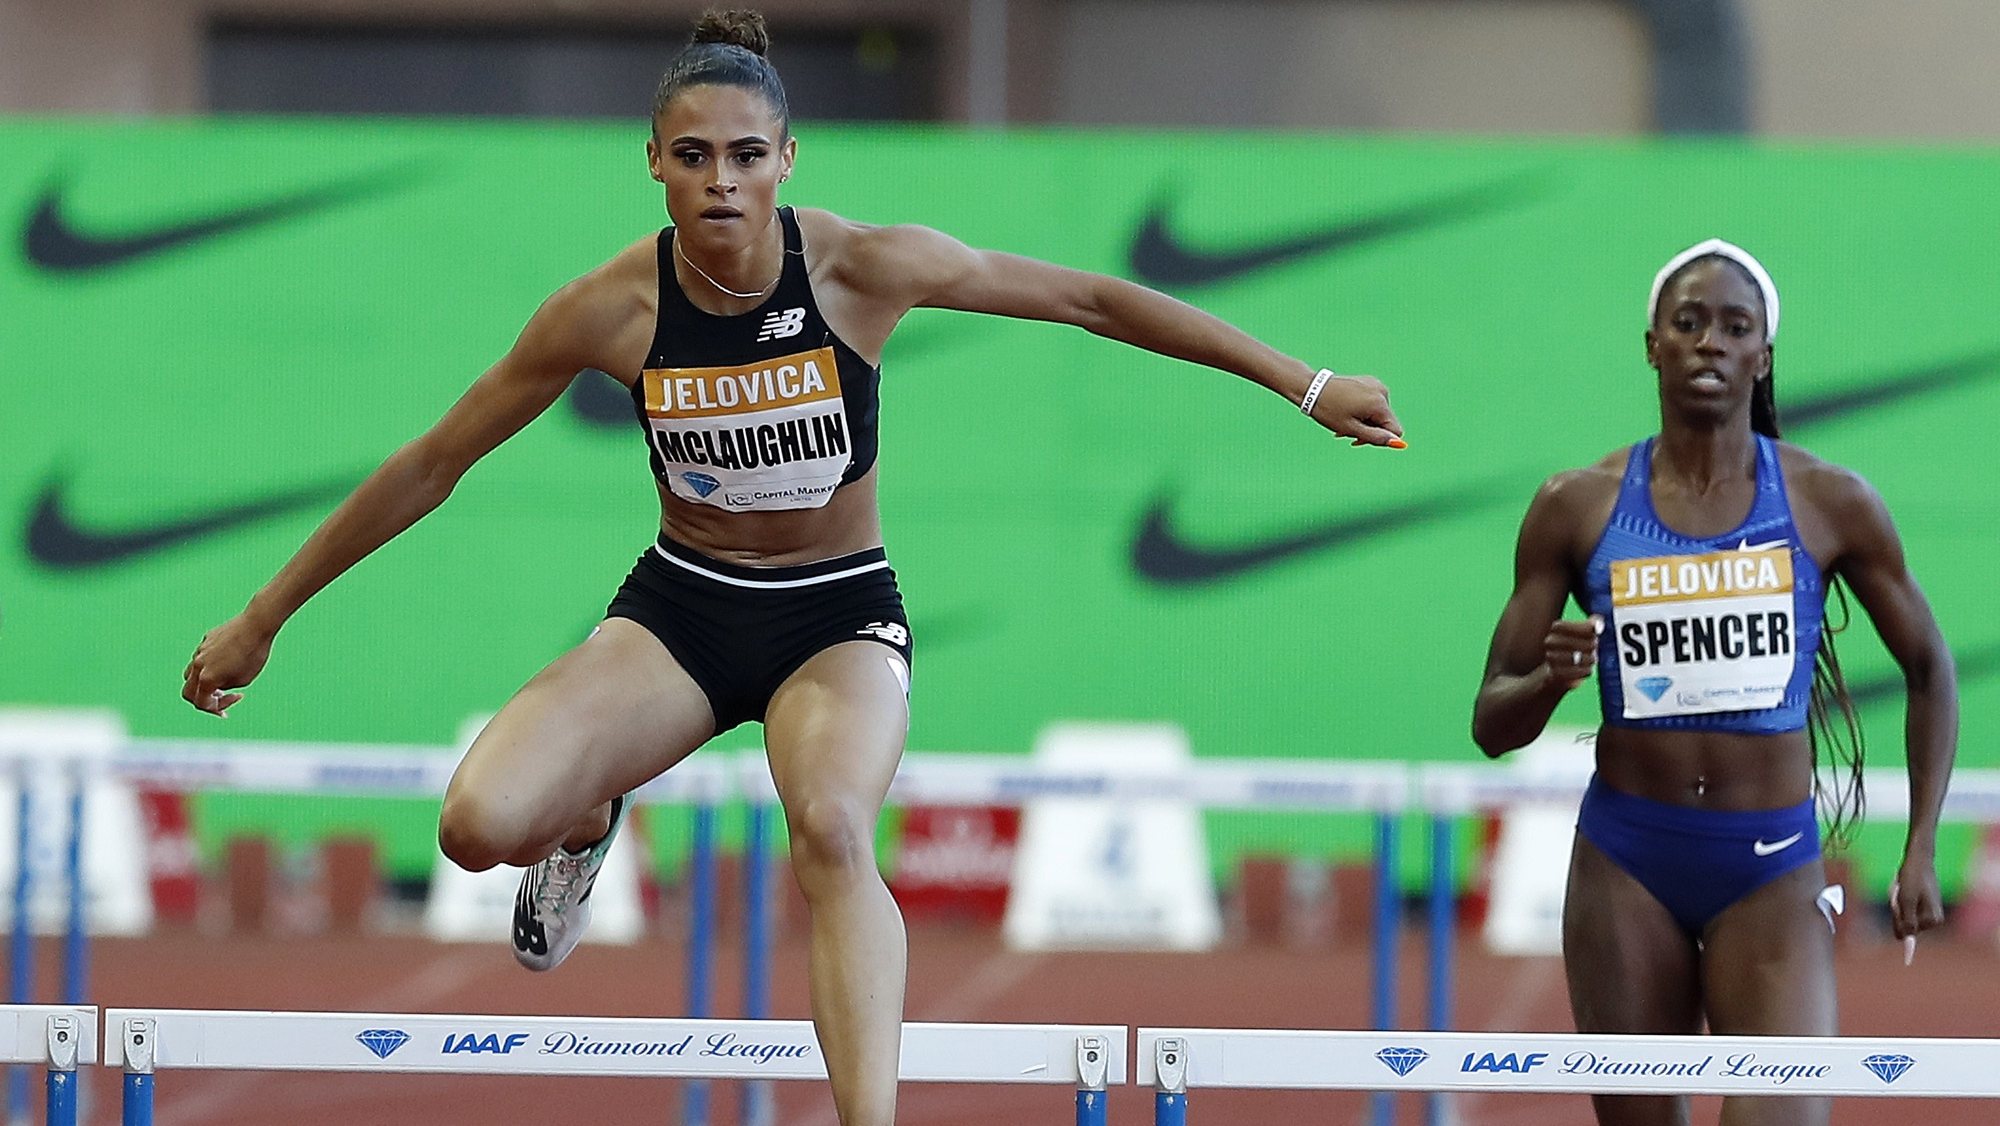 epa09307045 (FILE) - Sydney McLaughlin (L) from the USA competes in the 400m Hurdles Women competition during the IAAF Diamond League meeting at Stade Louis II in Monaco, 12 July 2019 (reissued 28 June 2021). McLaughlin set a new world record of 51.90 seconds in the Women&#039;s 400m Hurdles during the U.S. Olympic Track and Field Trials.  EPA/SEBASTIEN NOGIER